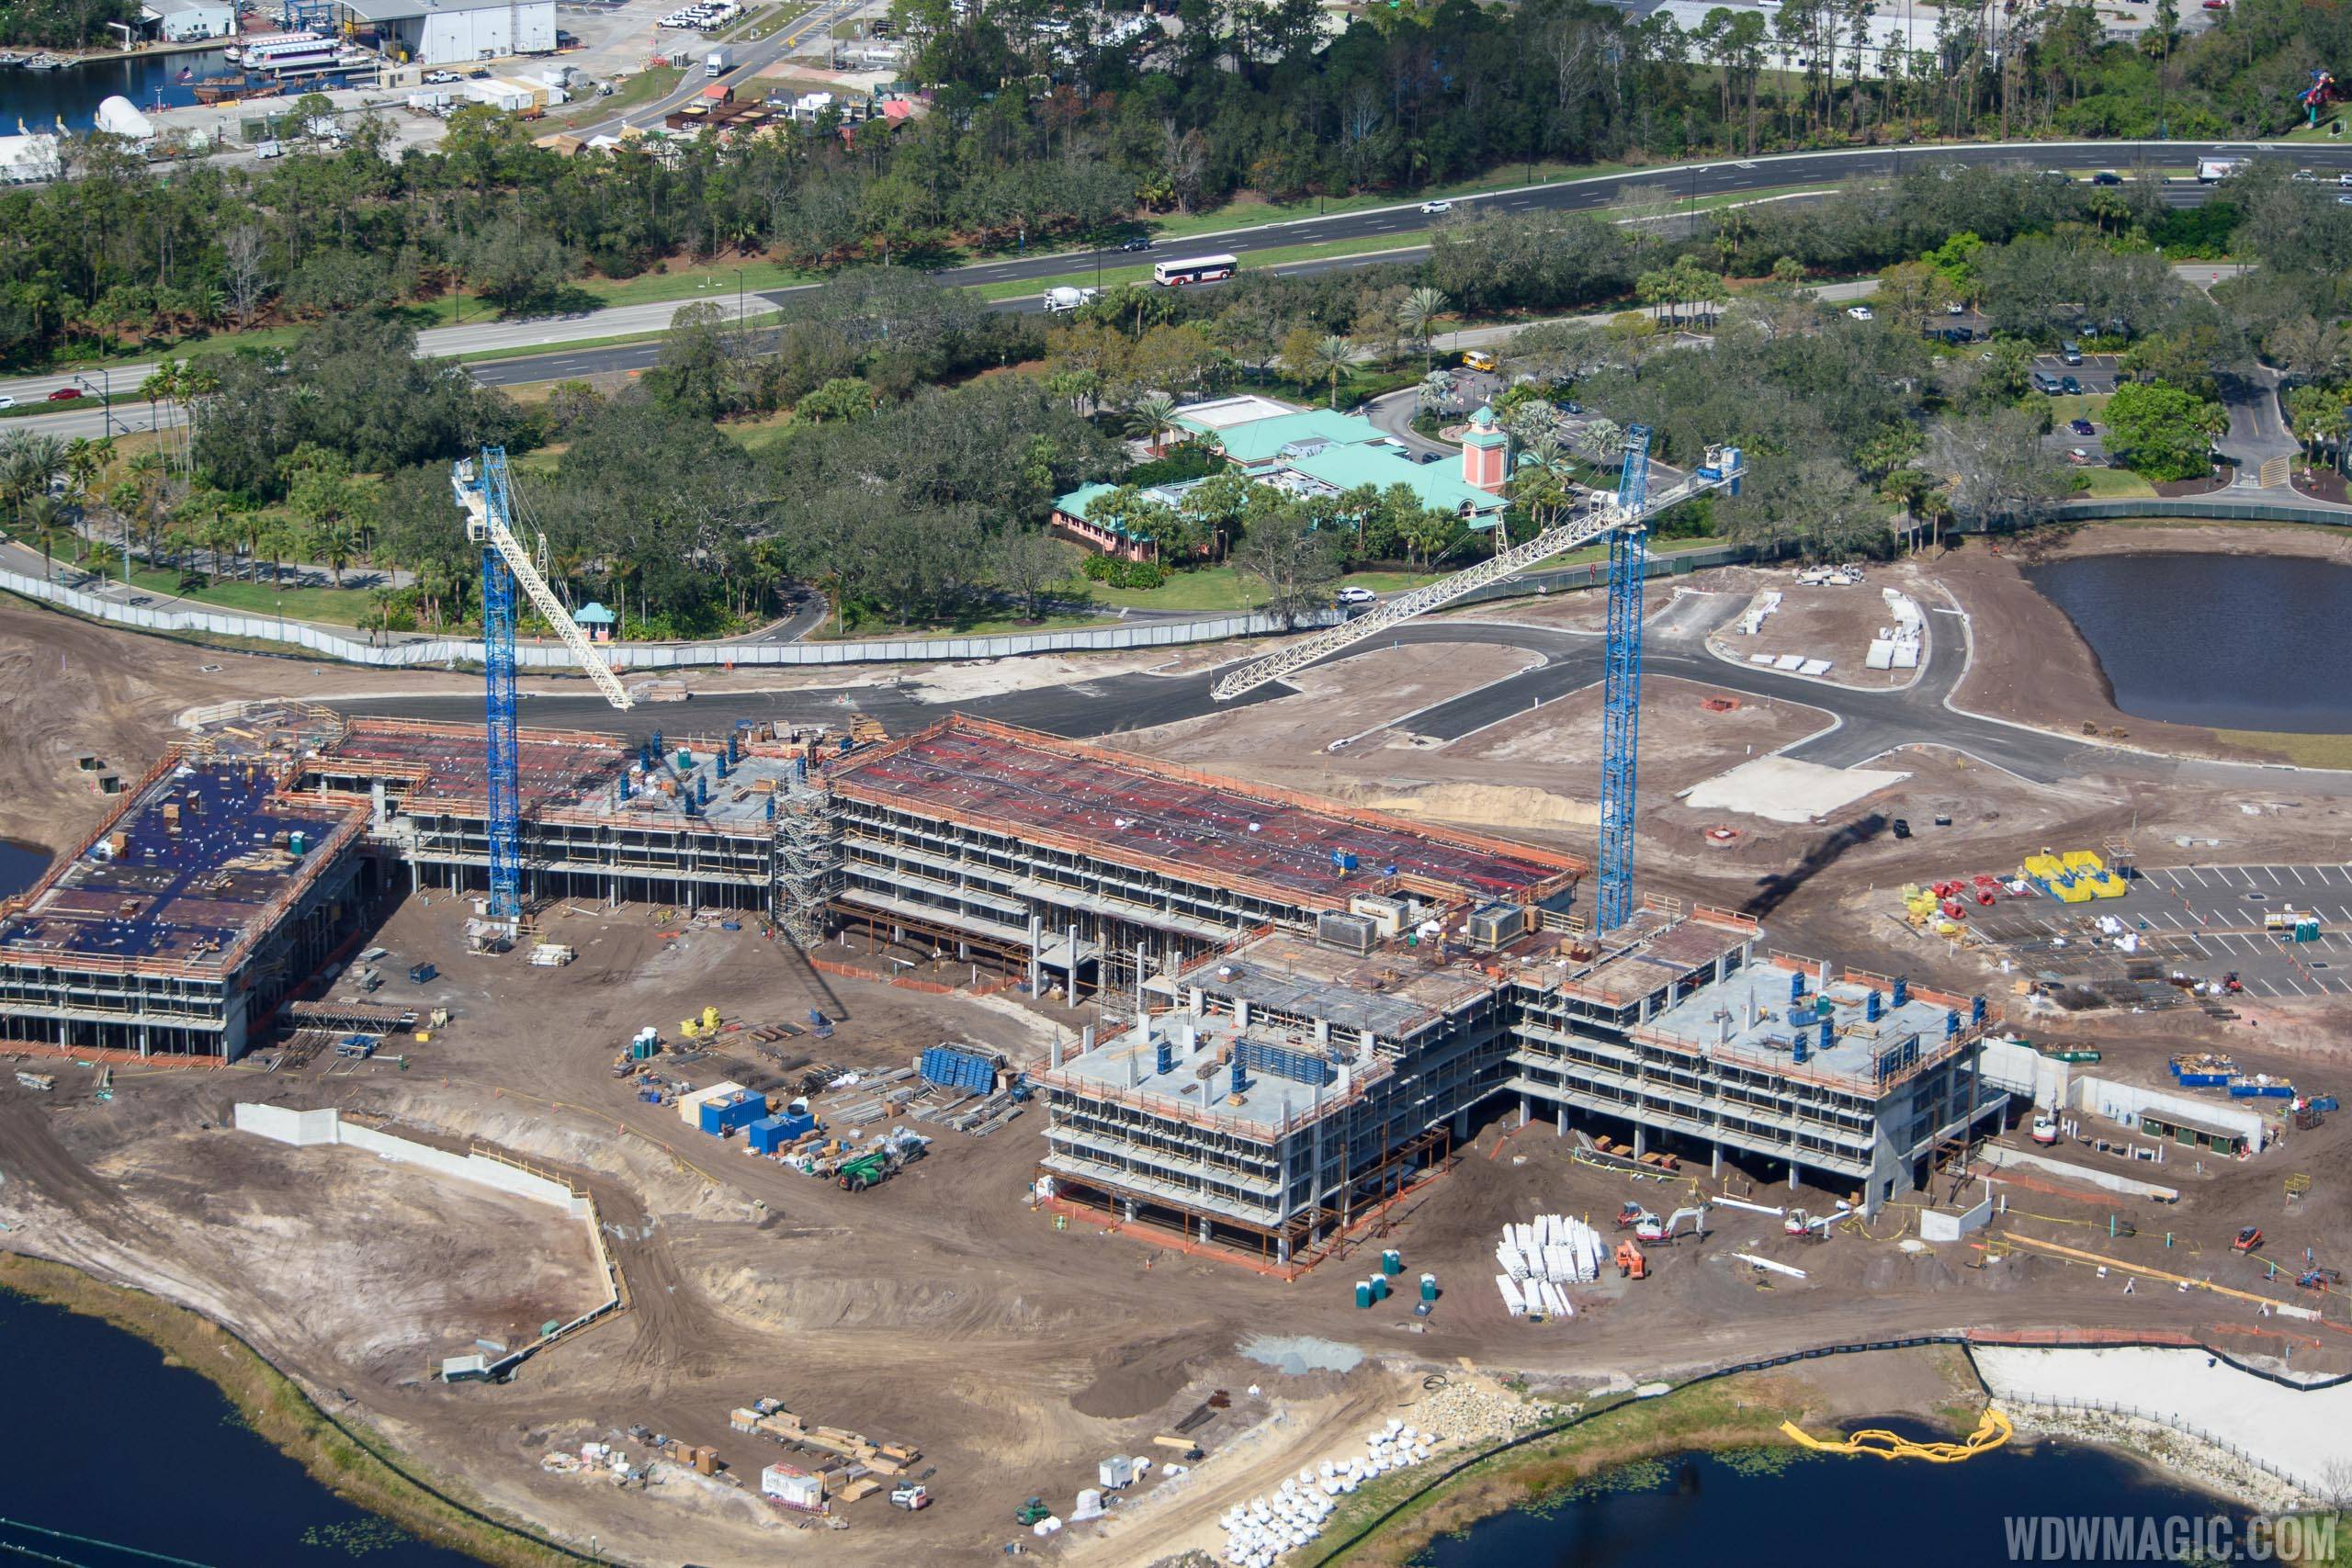 Disney Riviera construction from the air - February 2018